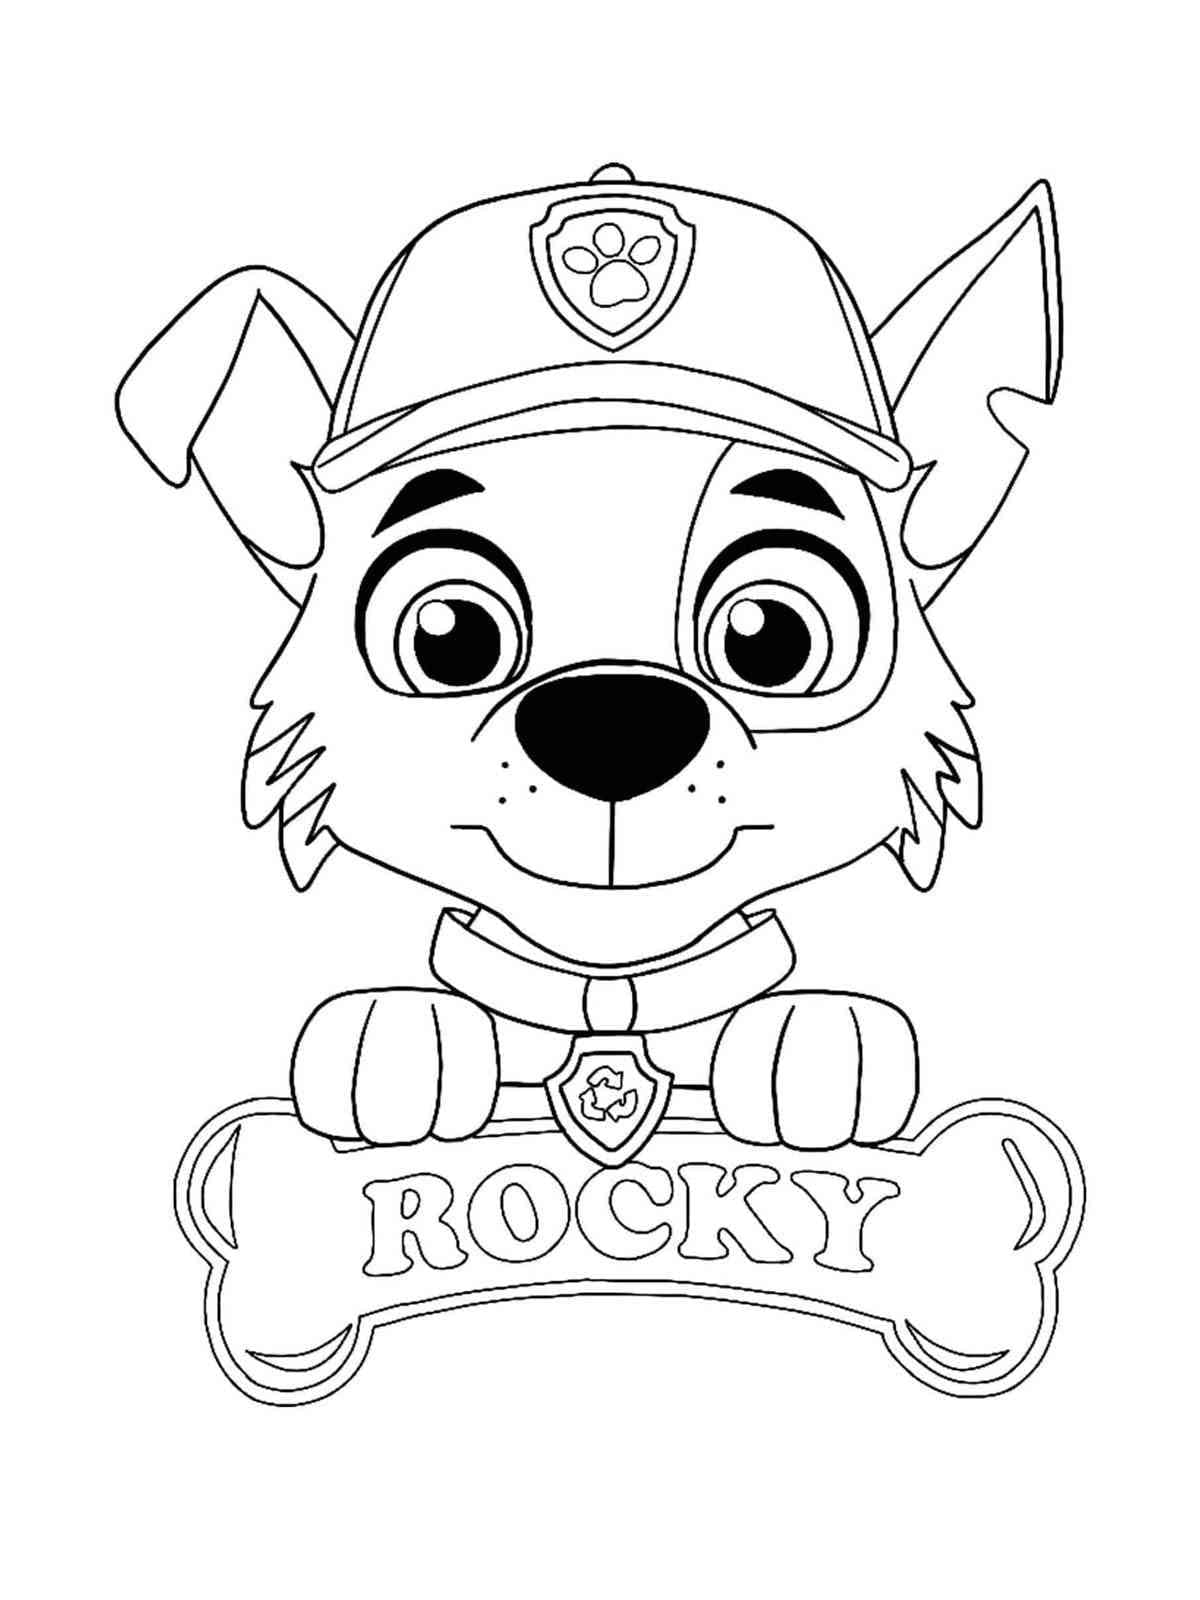 How to draw Rocky - Paw Patrol Characters